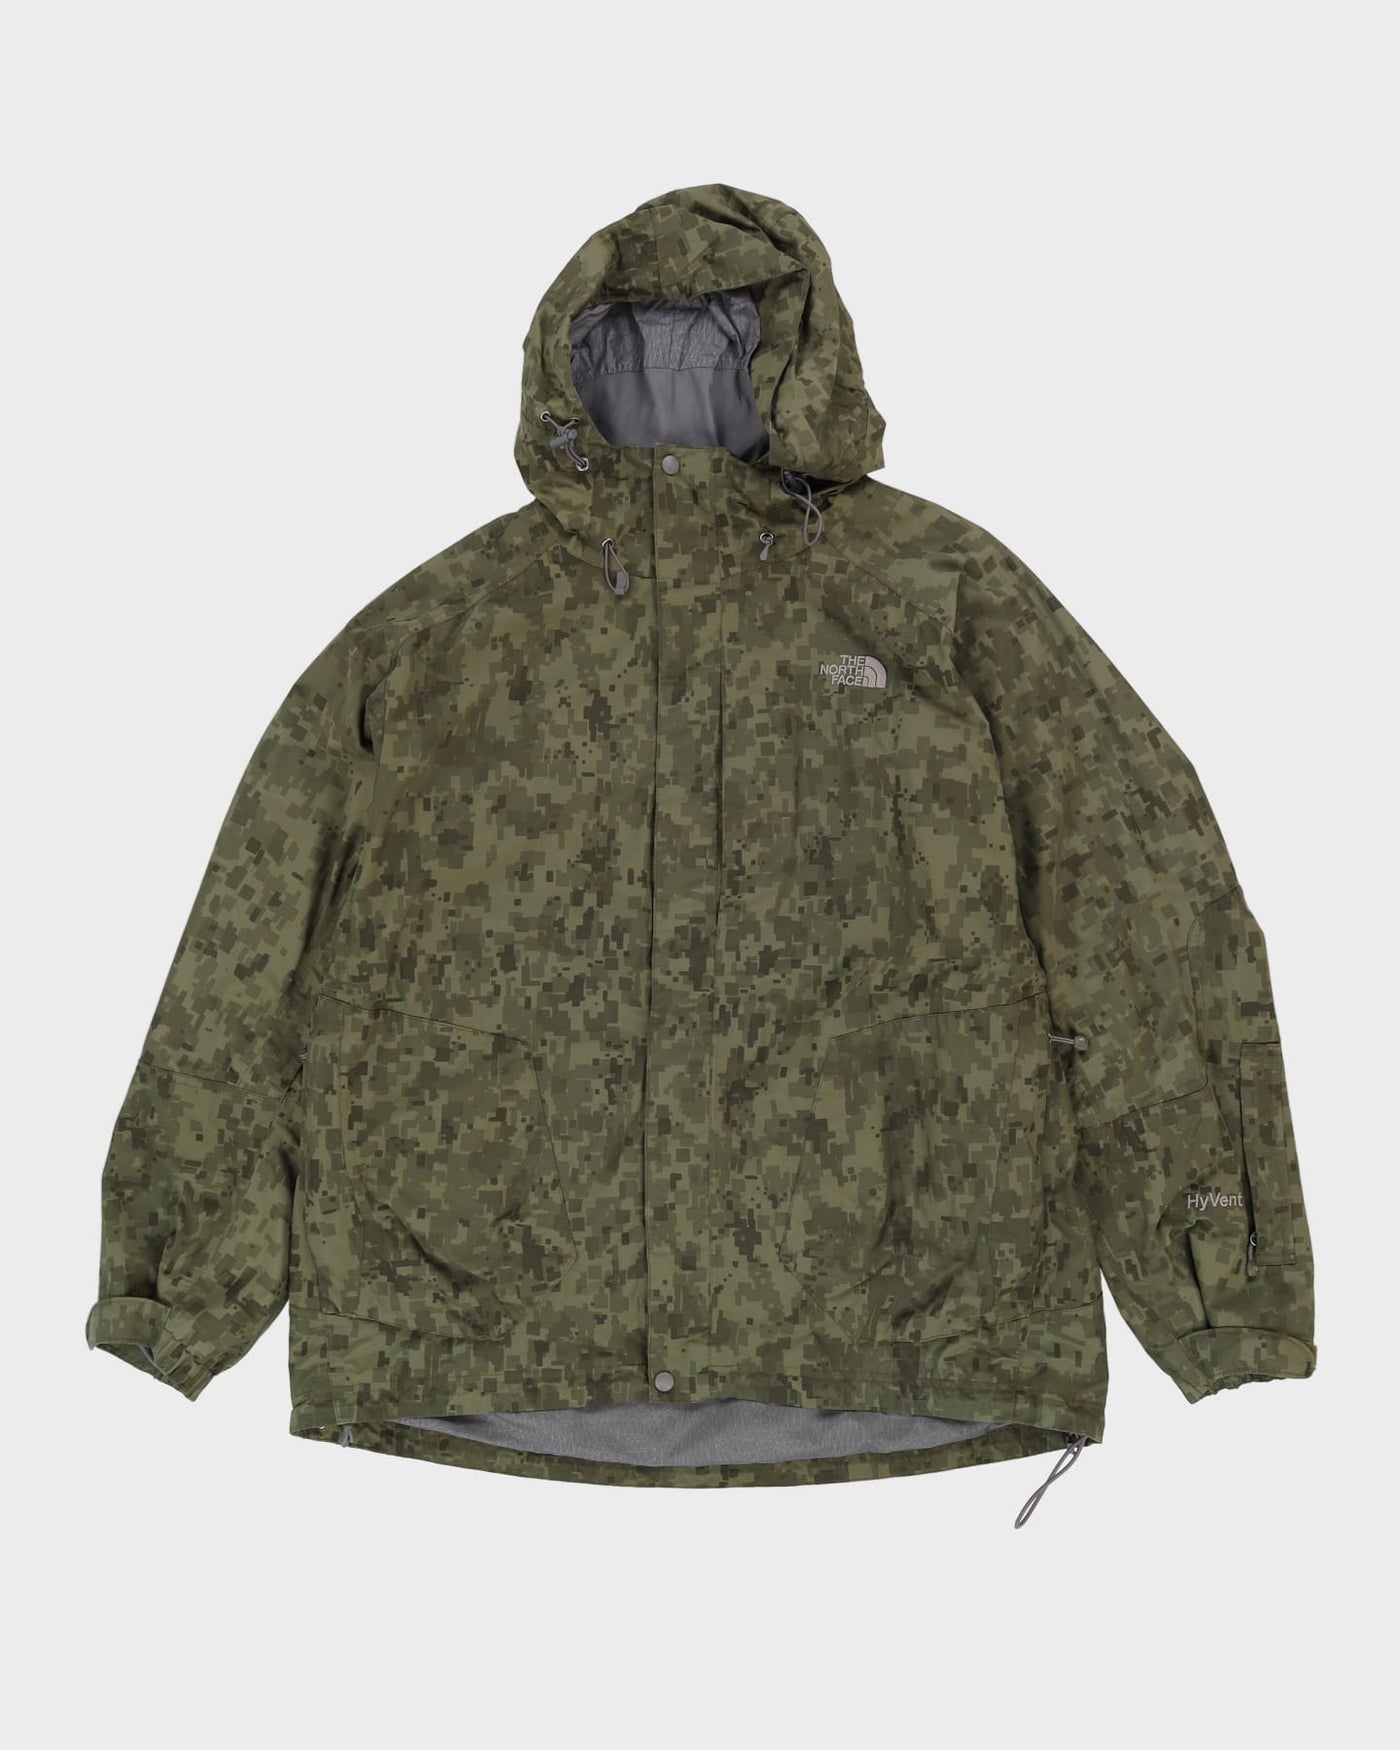 The North Face Green Camouflage Patterned Hooded Anorak Jacket - XL